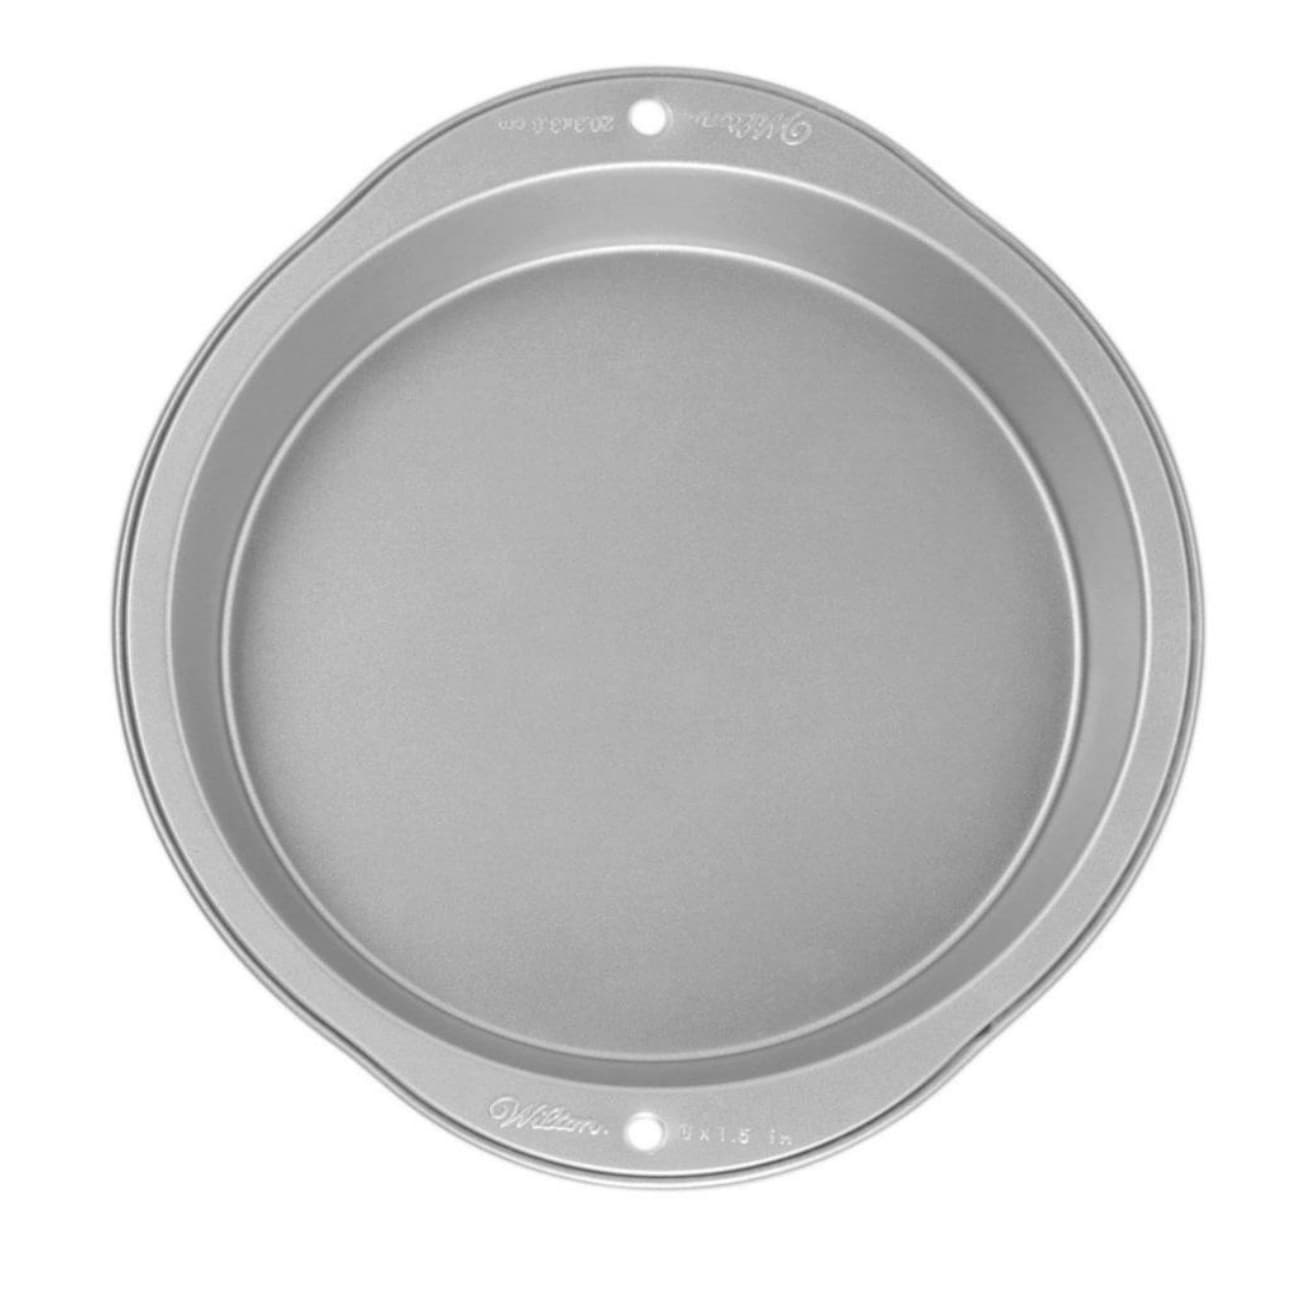 https://ak1.ostkcdn.com/images/products/is/images/direct/fa302802711cbb40a6726e511890ae36d9364419/Wilton-2105-957-Round-Cake-Pan%2C-Silver%2C-8%22.jpg